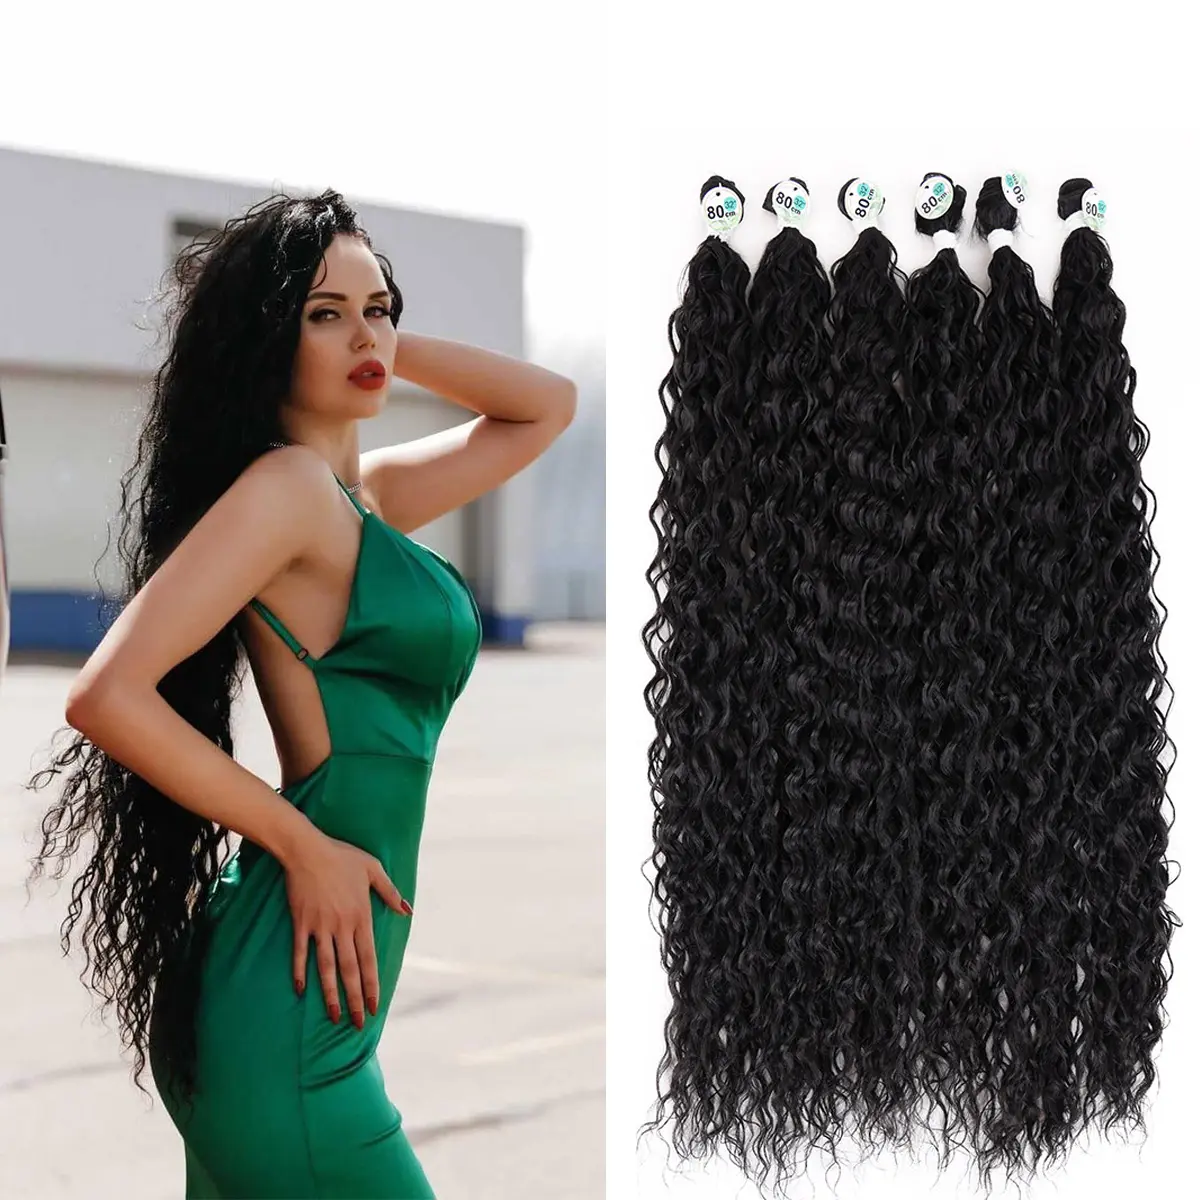 Synthetic Afro Curly Hair Bundles For Extensions 18-30 Inch Soft Long Hair Synthetic Wave Hair Synthetic Weaving Extension